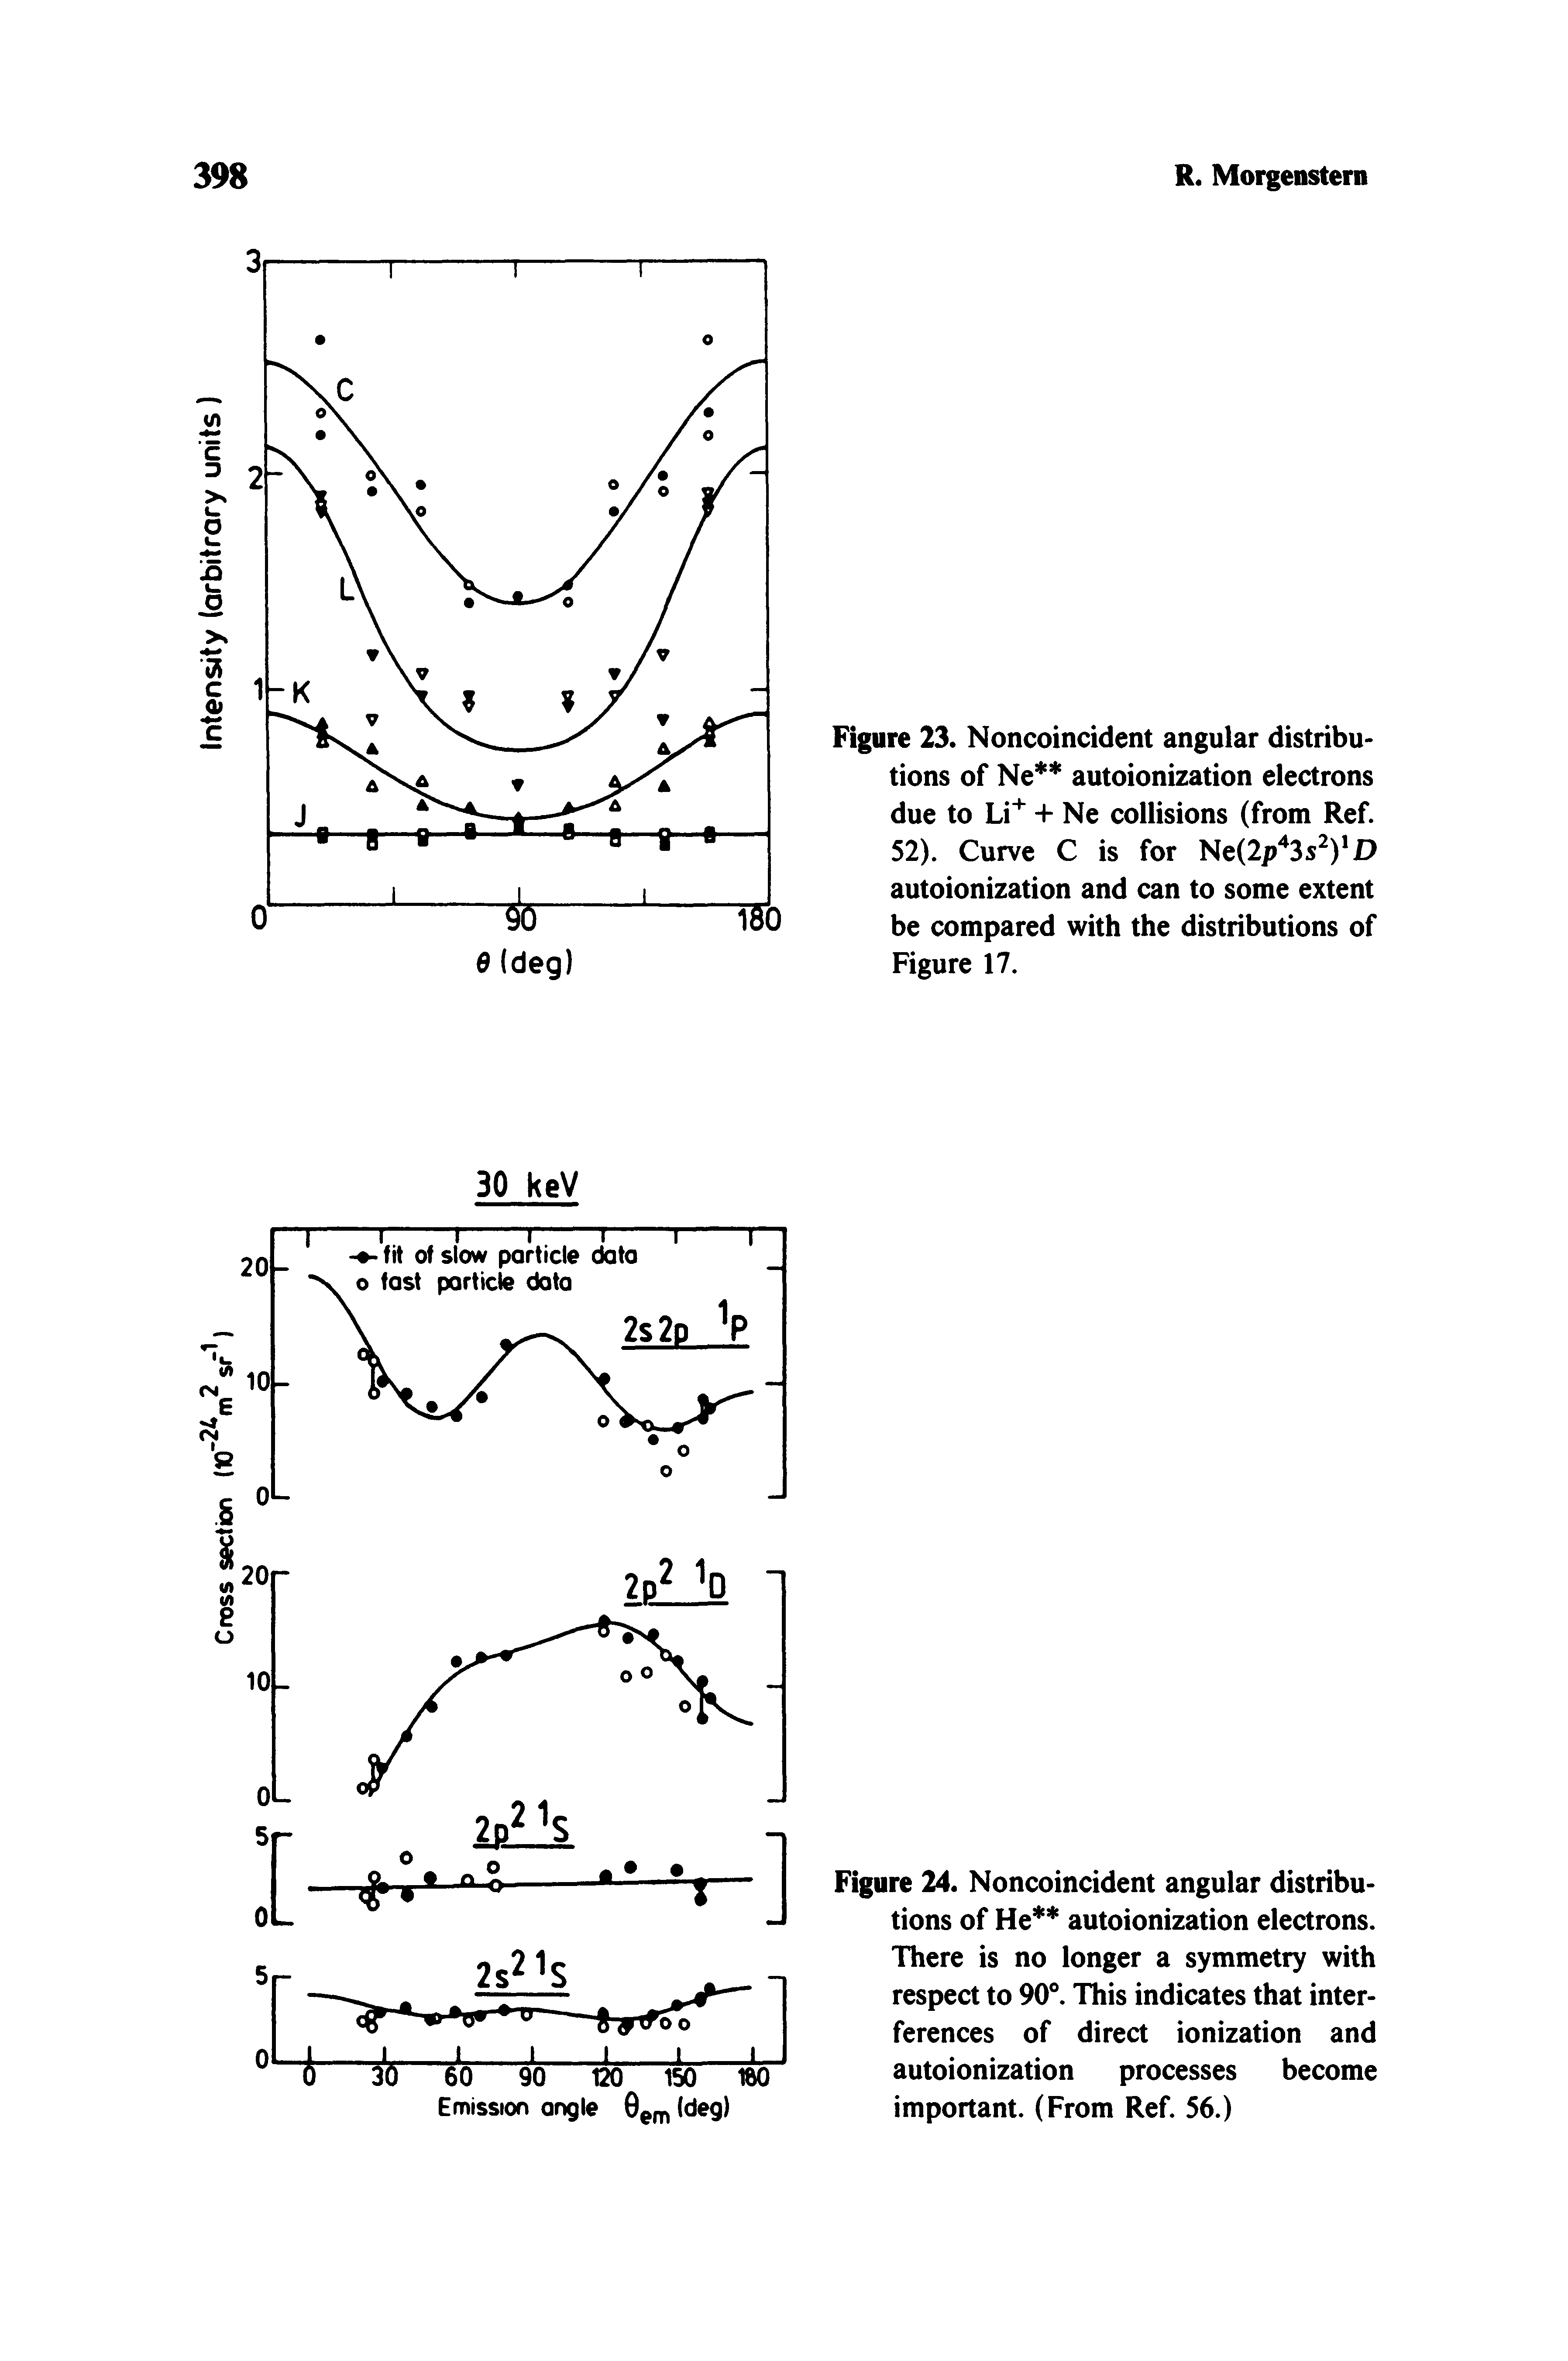 Figure 24. Noncoincident angular distributions of He autoionization electrons. There is no longer a symmetry with respect to 90°. This indicates that interferences of direct ionization and autoionization processes become important. (From Ref. 56.)...